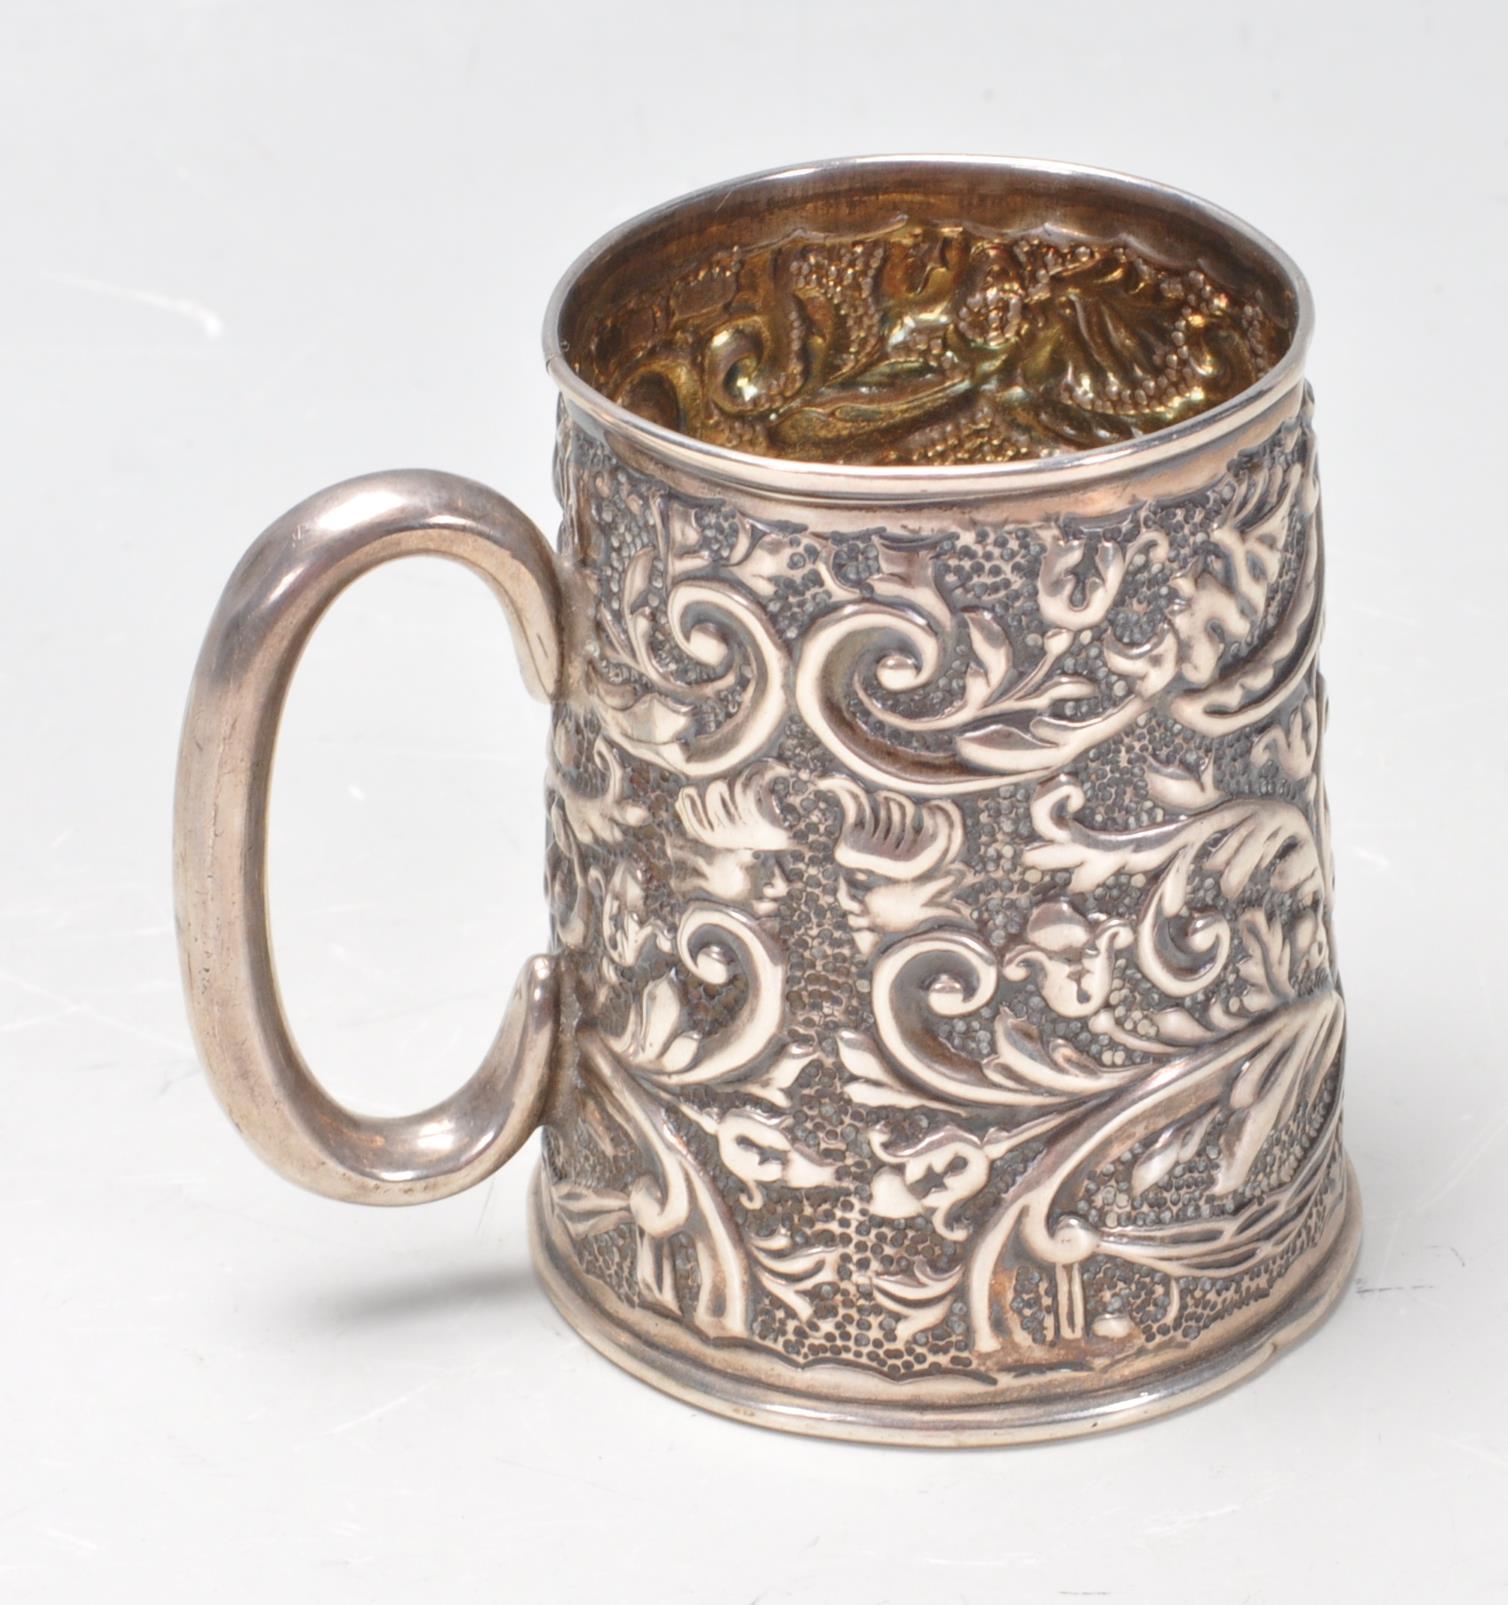 EDWARDIAN SILVER CHRISTENING CUP - Image 3 of 7